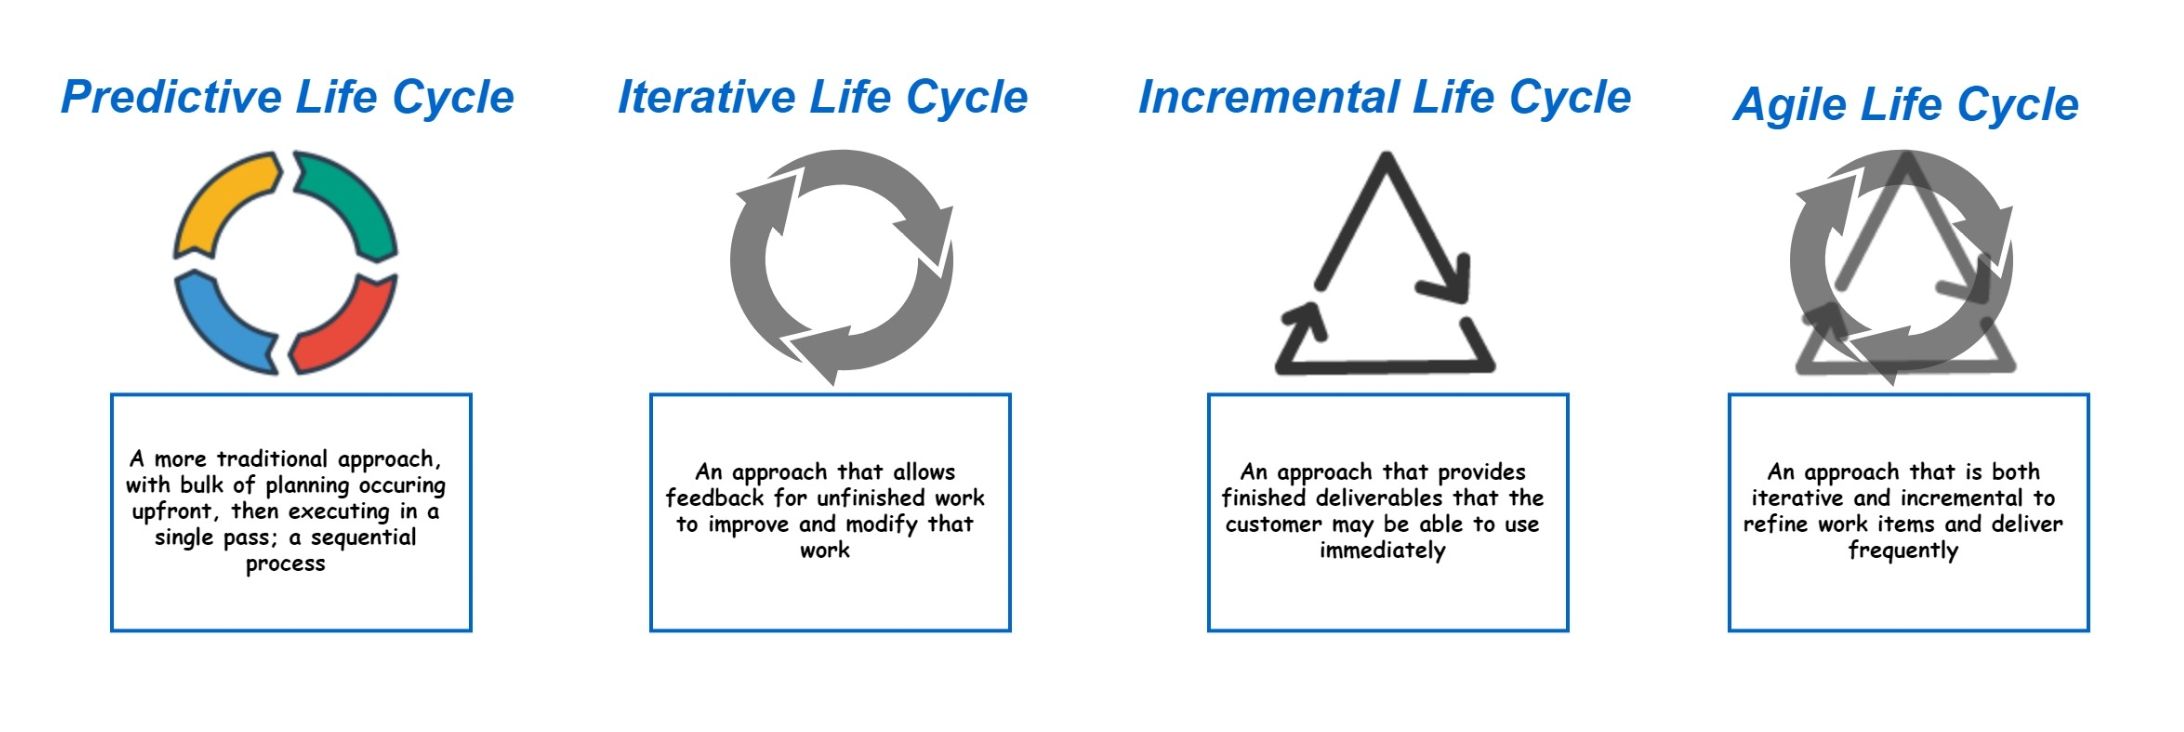 Predictive, Iterative, Incremental and Agile life cycles illustrated